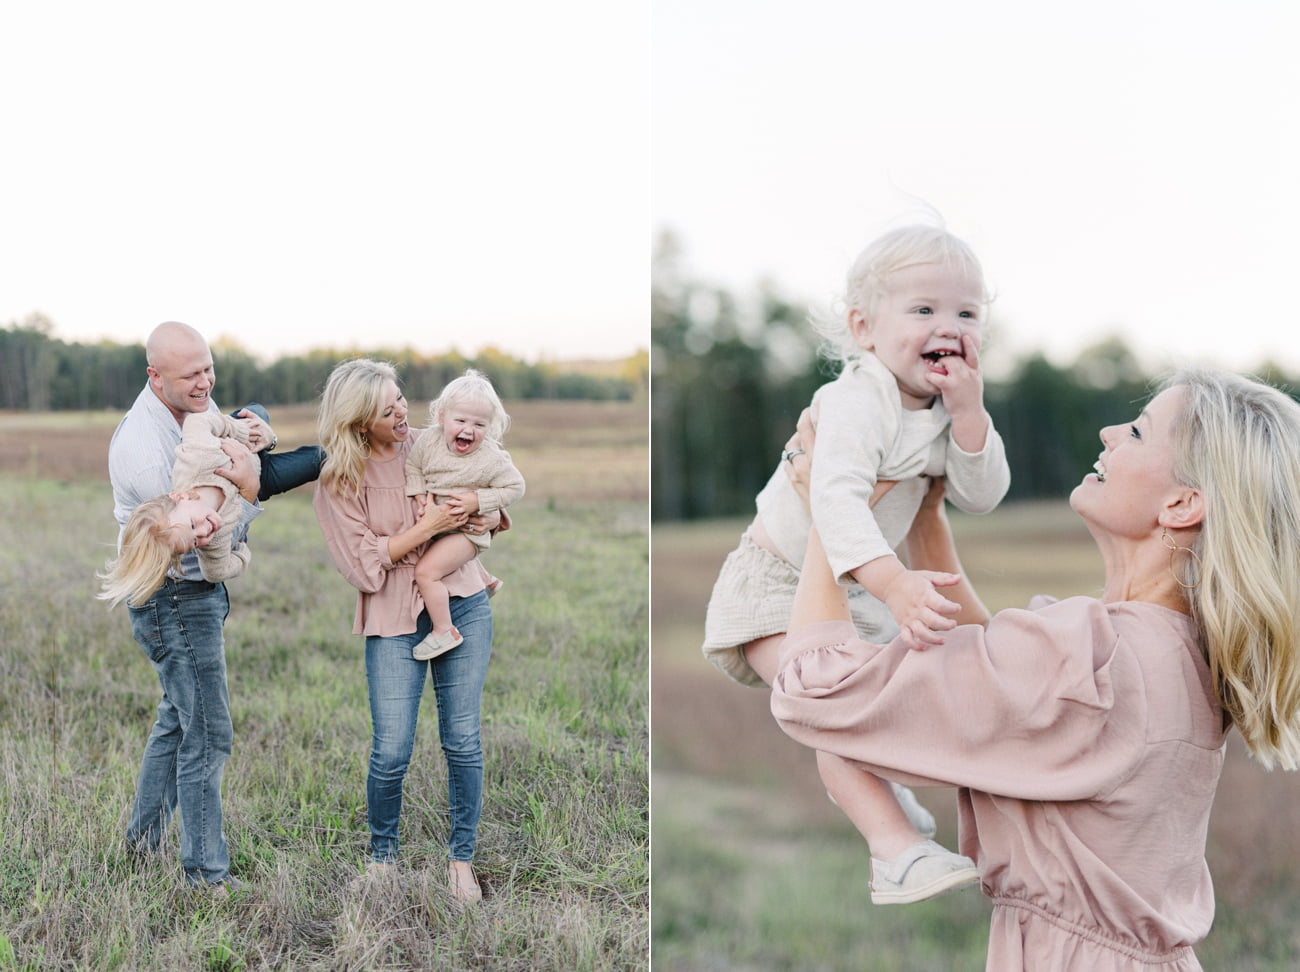 Beautiful candid family photography outdoors in Birmingham, AL